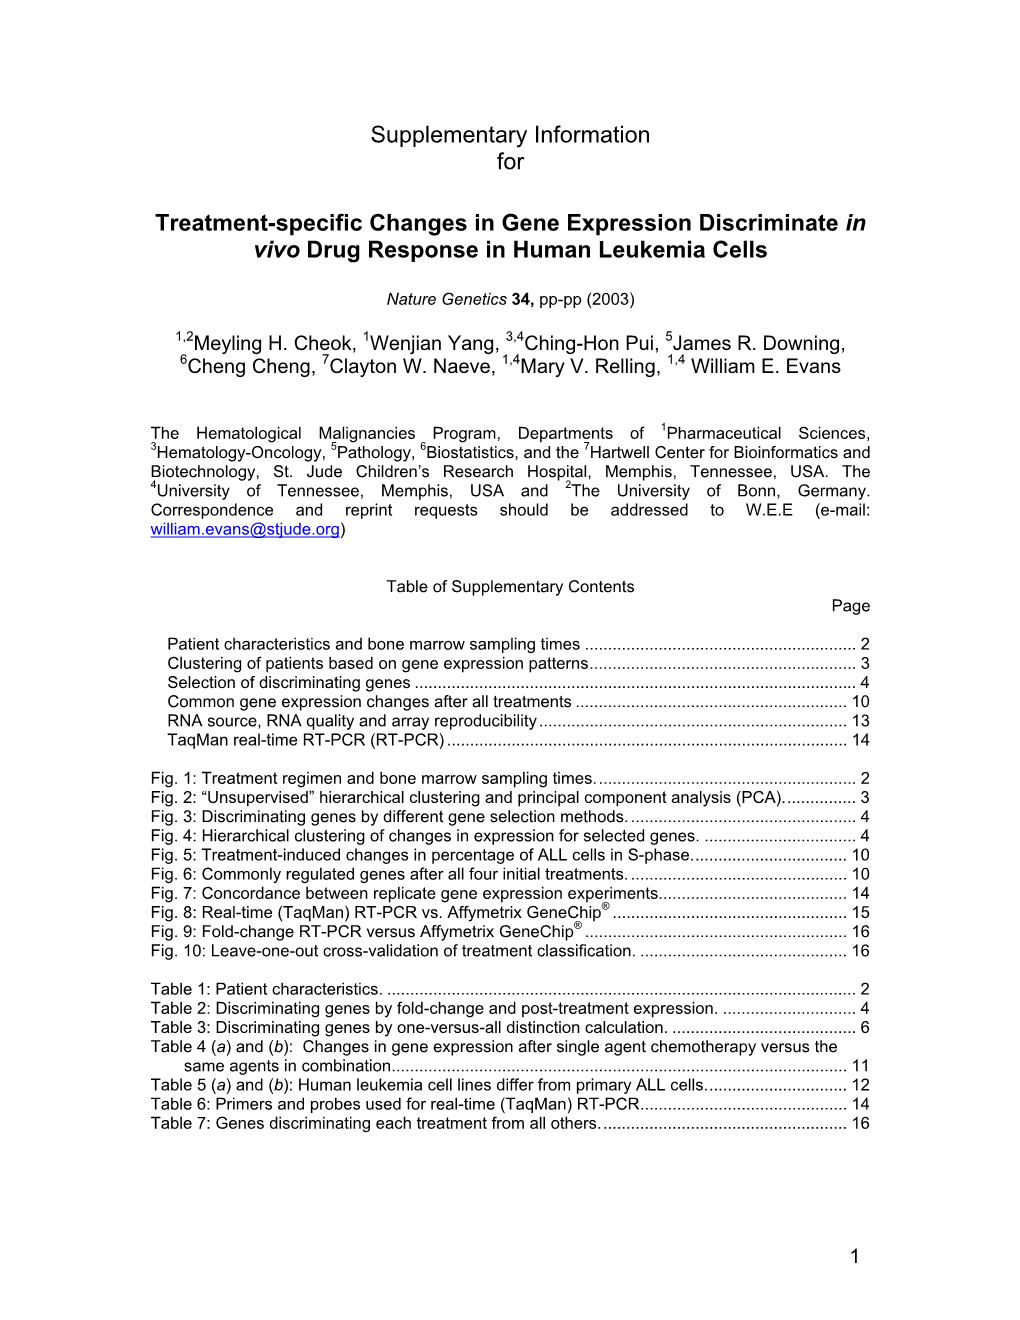 Supplementary Information for Treatment-Specific Changes In